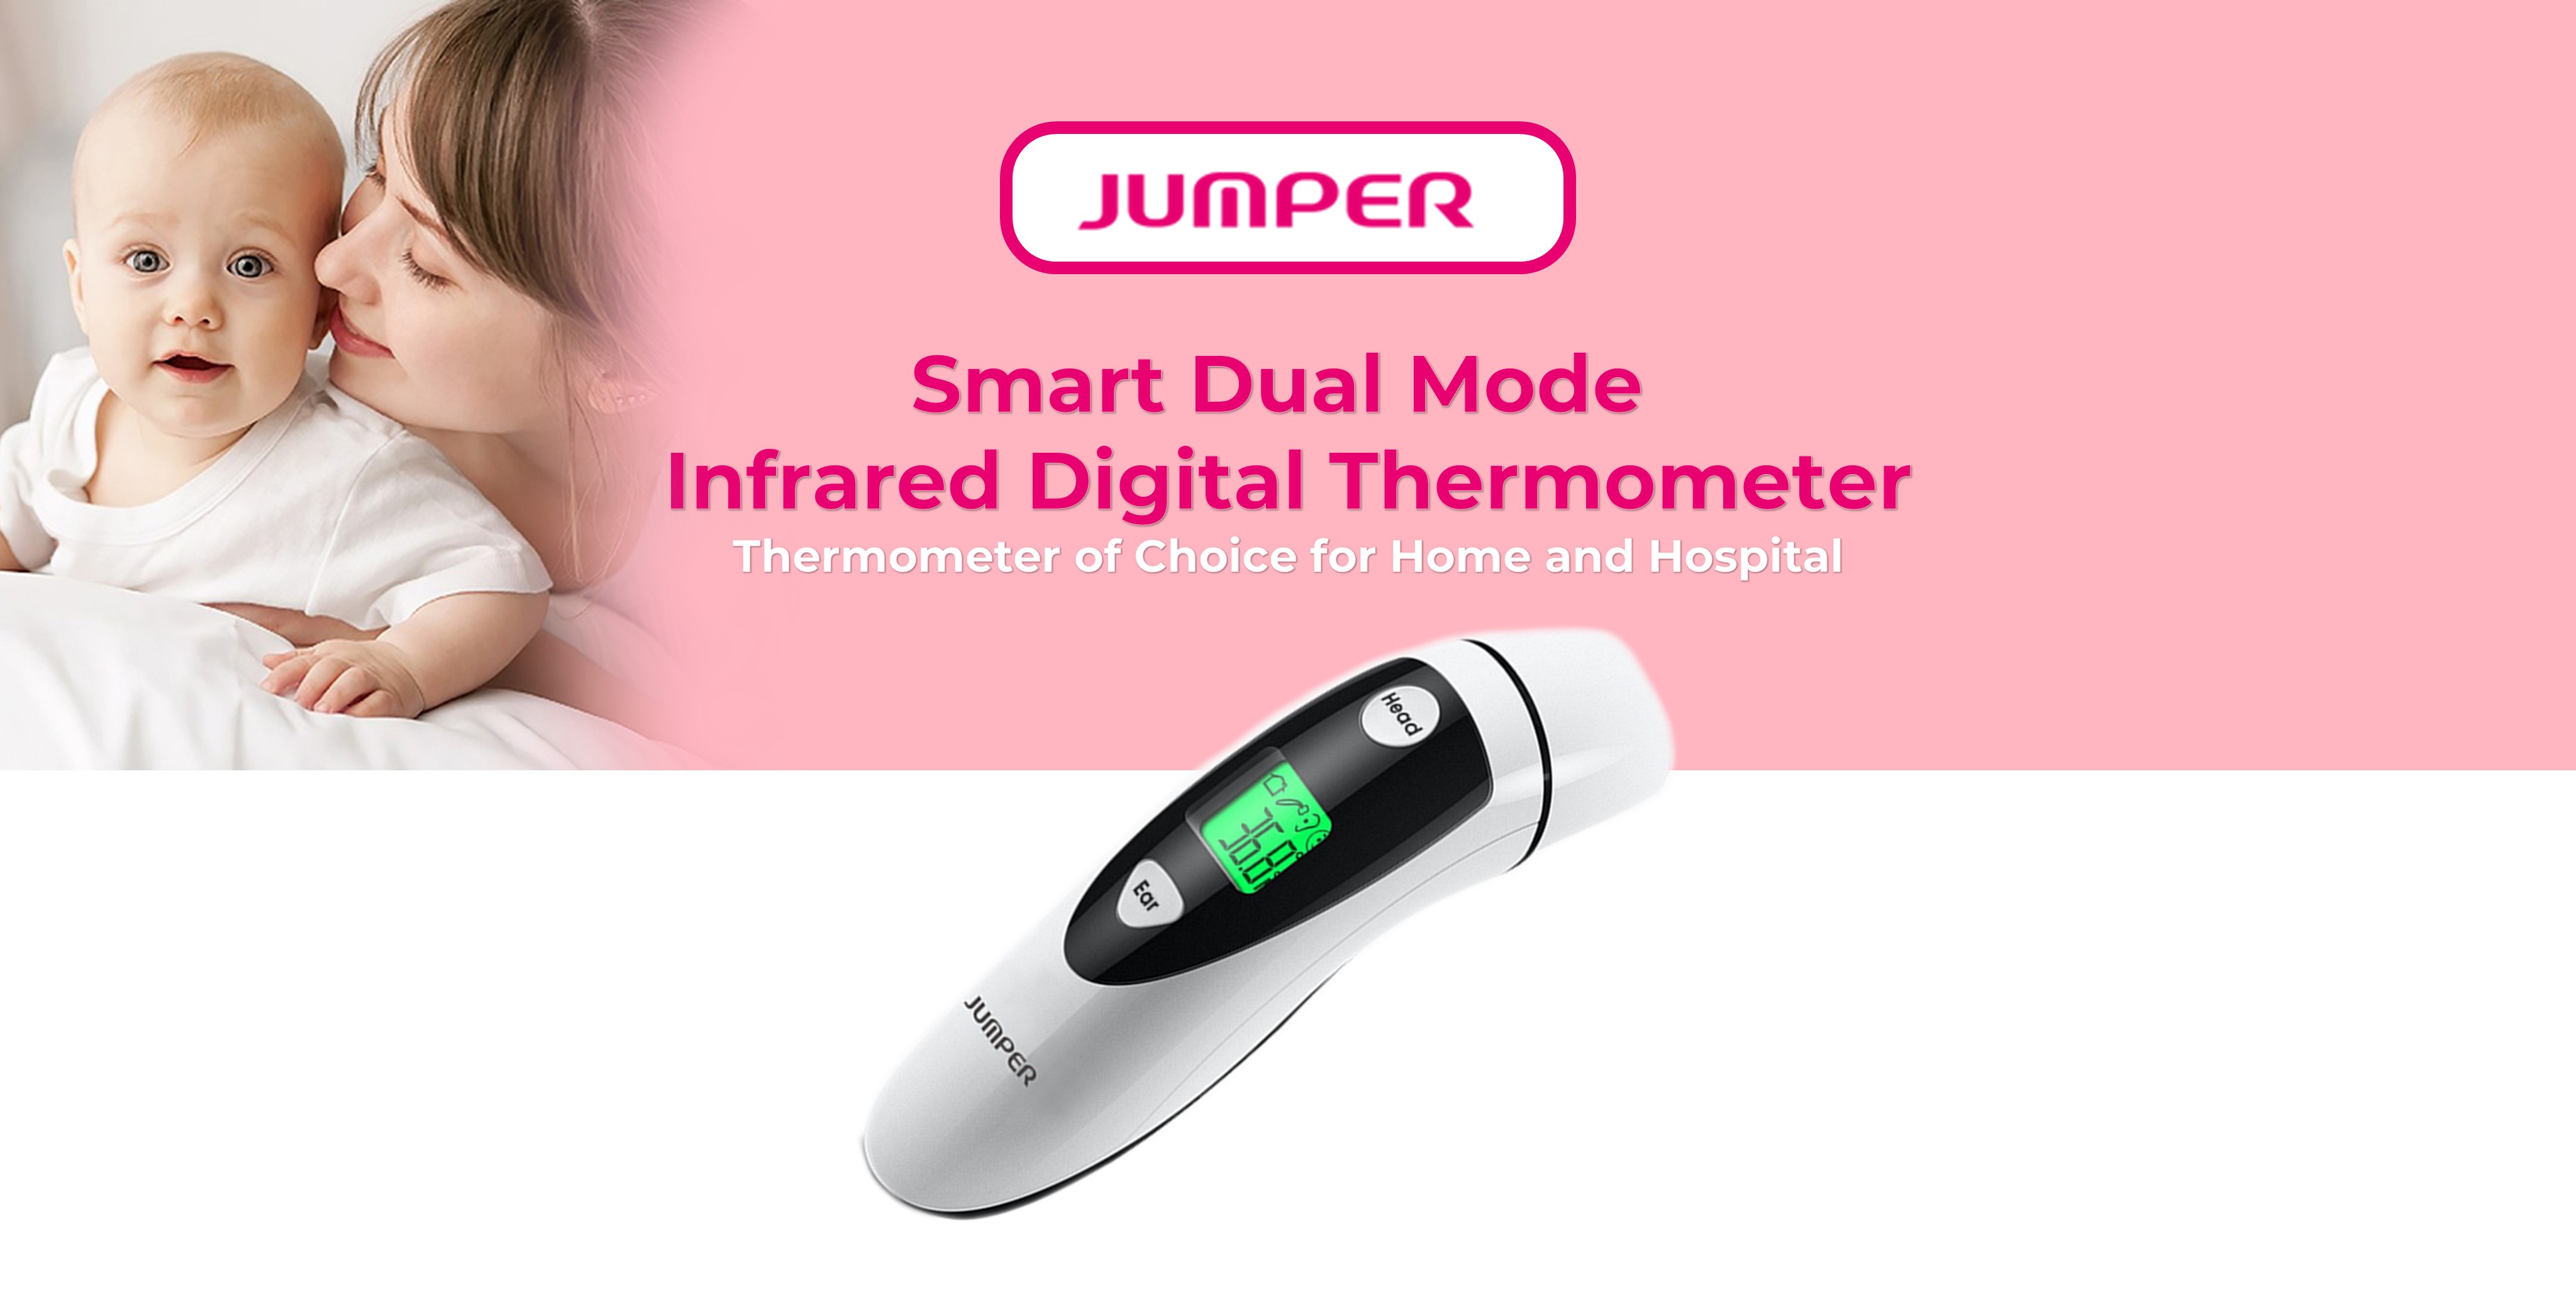 Jumper Non Contact Infrared Thermometer (Spectrum), Dental Product